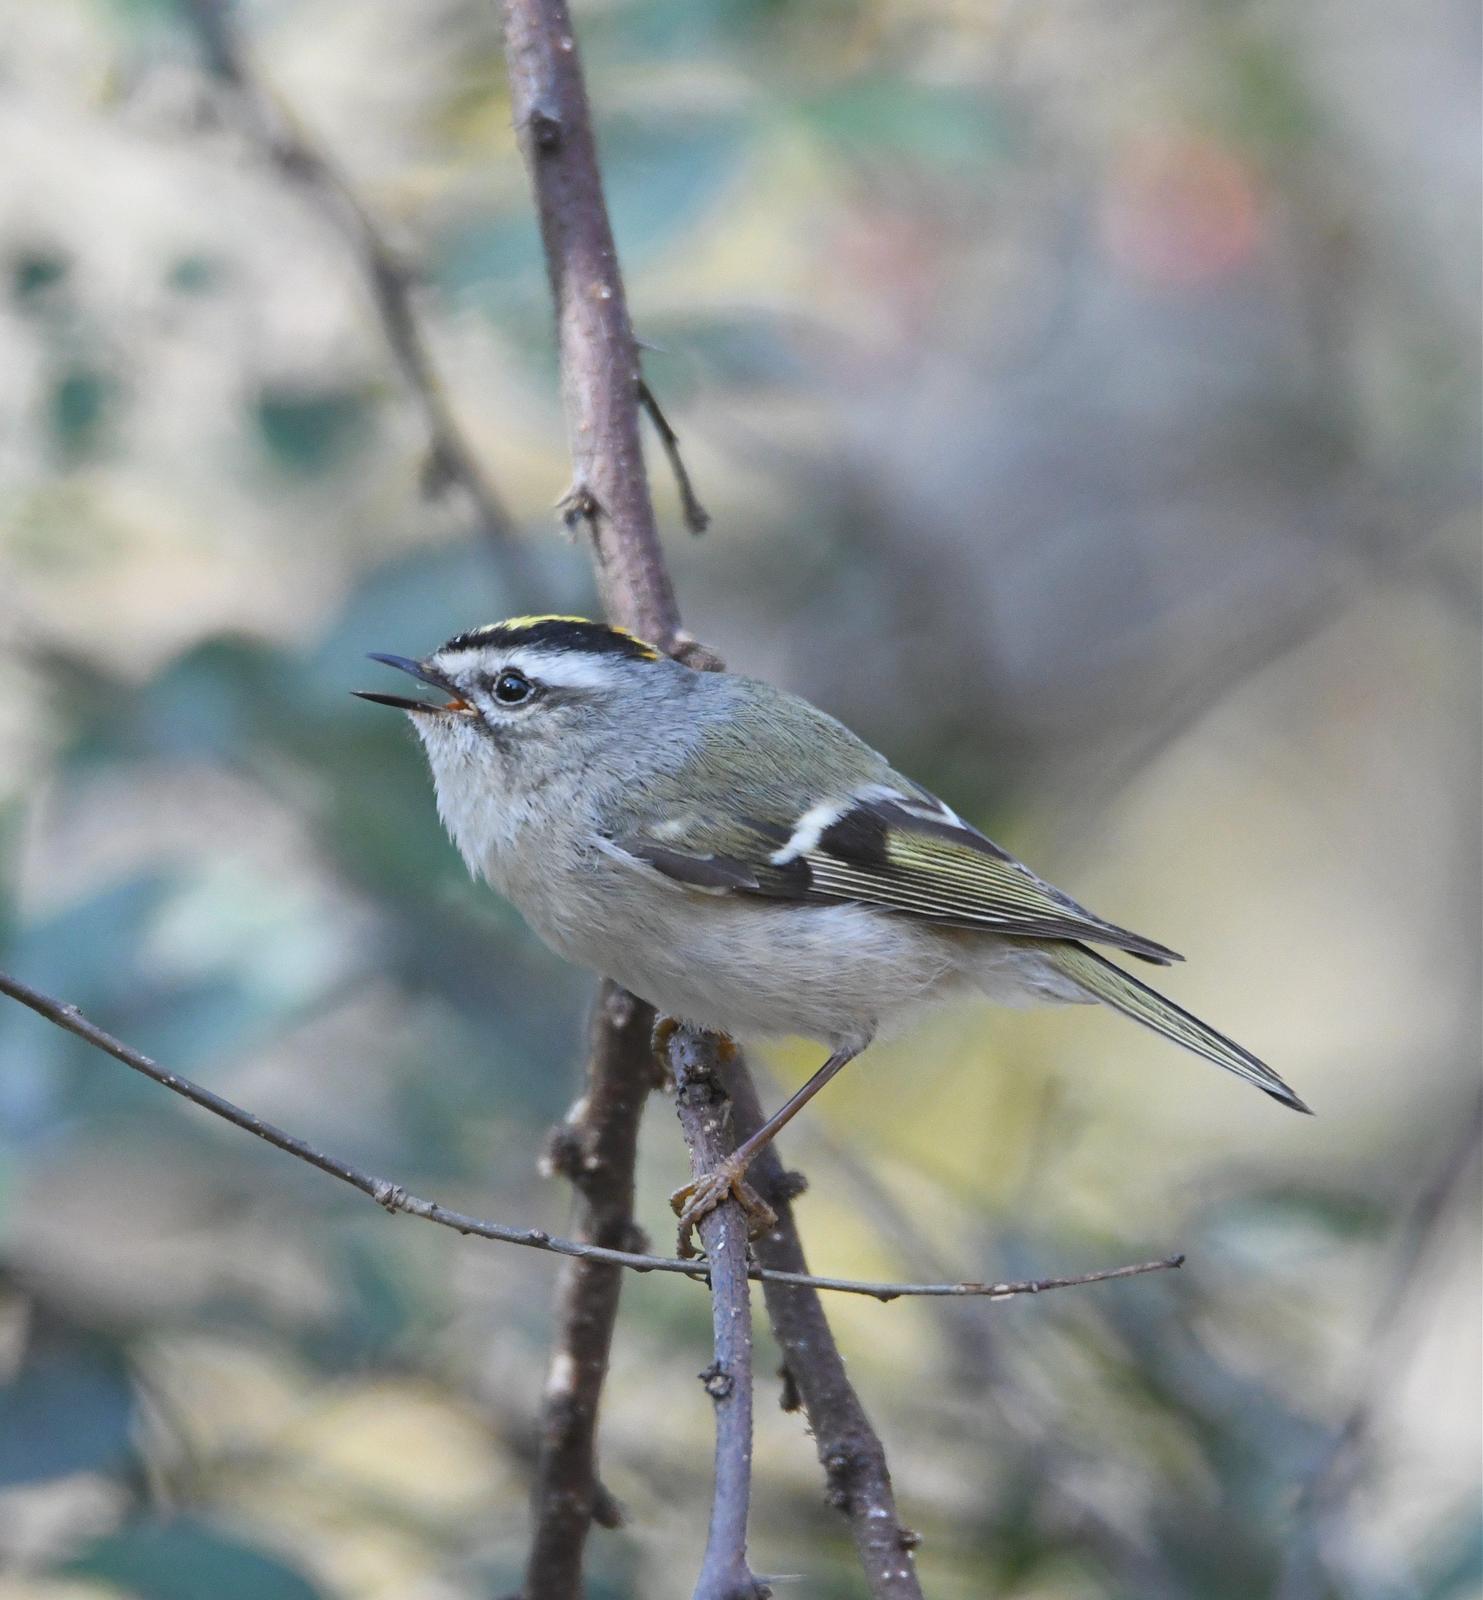 Golden-crowned Kinglet Photo by Jerry Chen